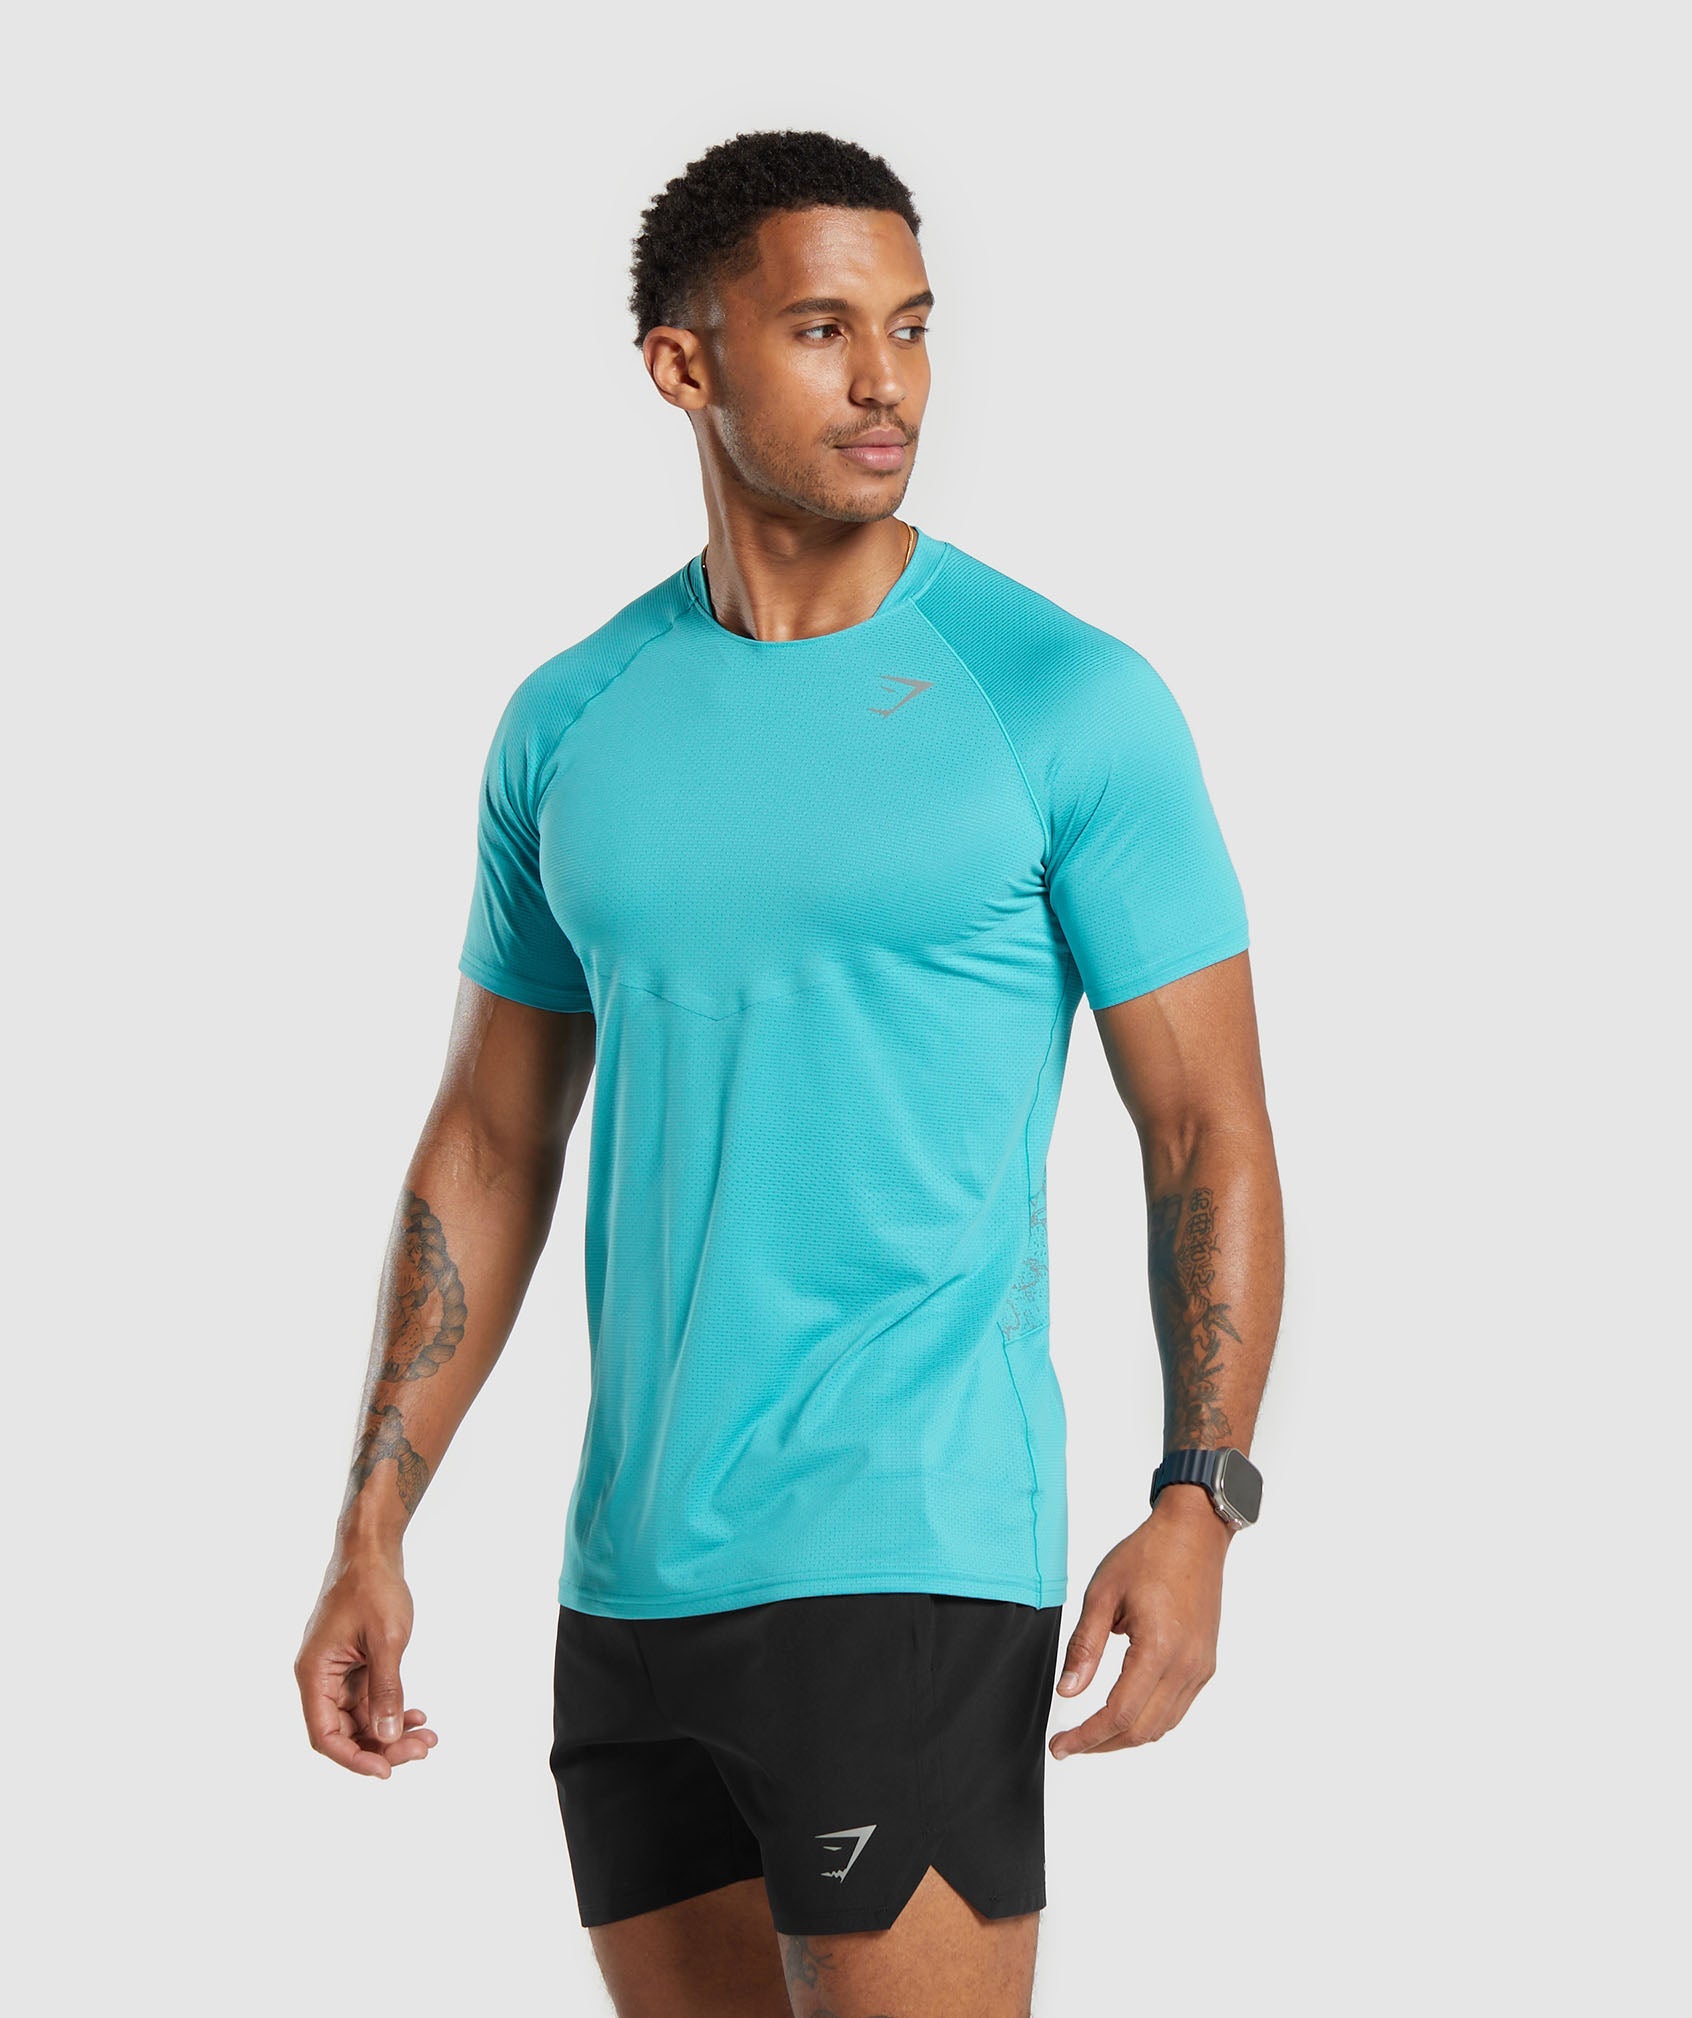 Speed T-Shirt in Artificial Teal - view 2